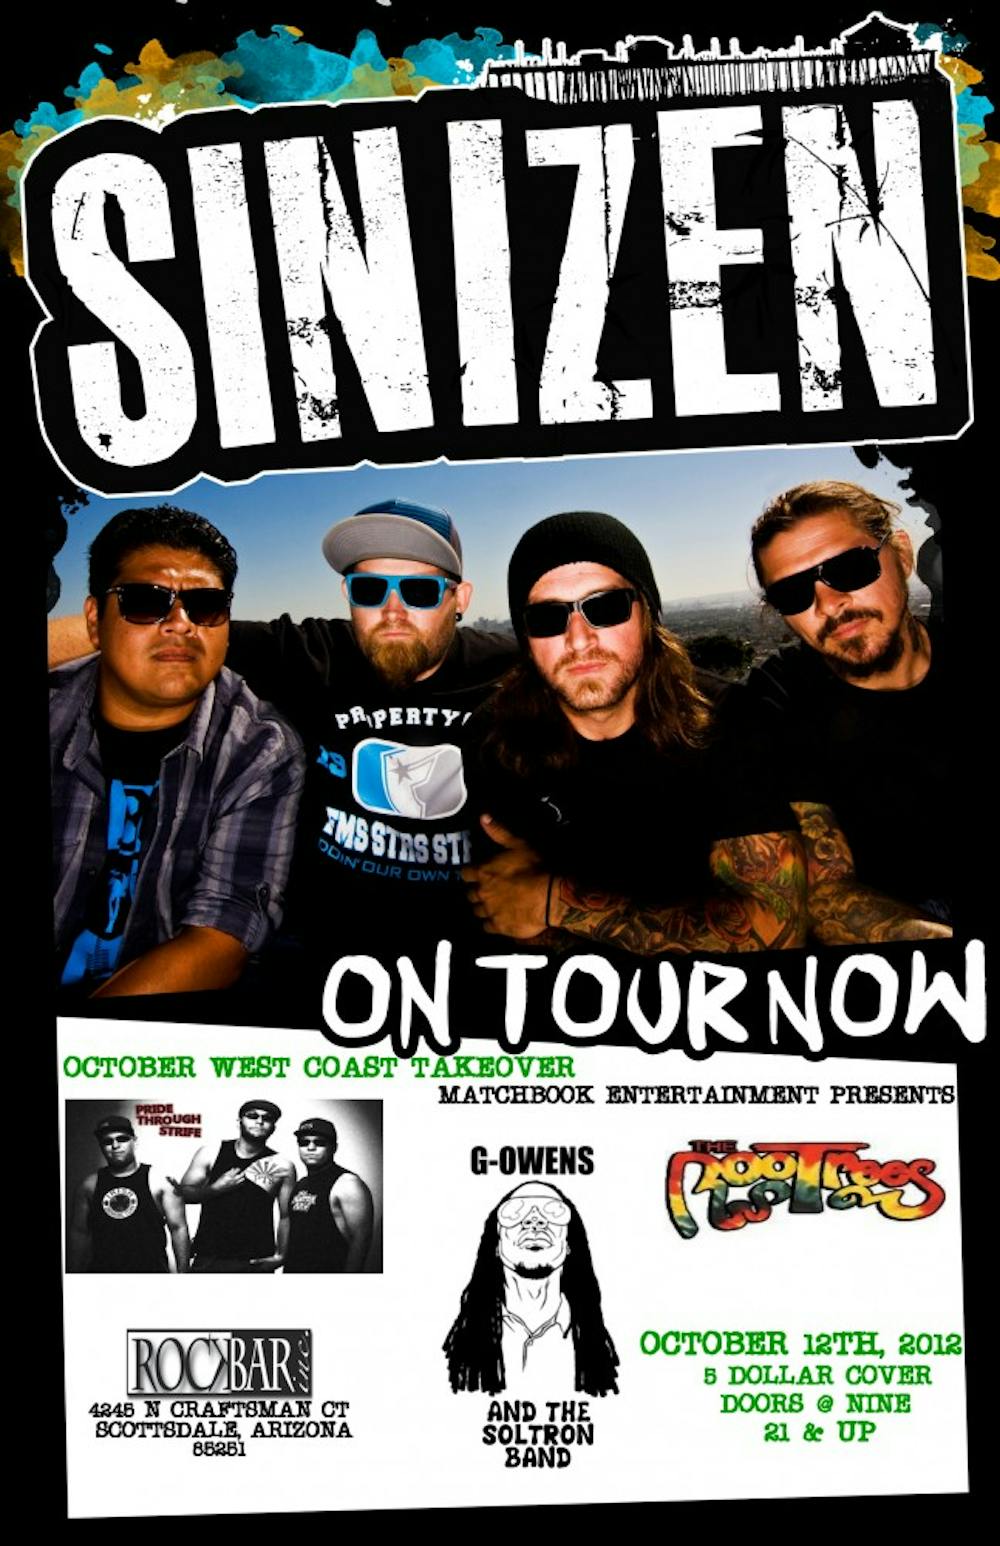 Sinizen will be in Scottsdale on Oct. 12. Photo courtesy of MIke Piper.